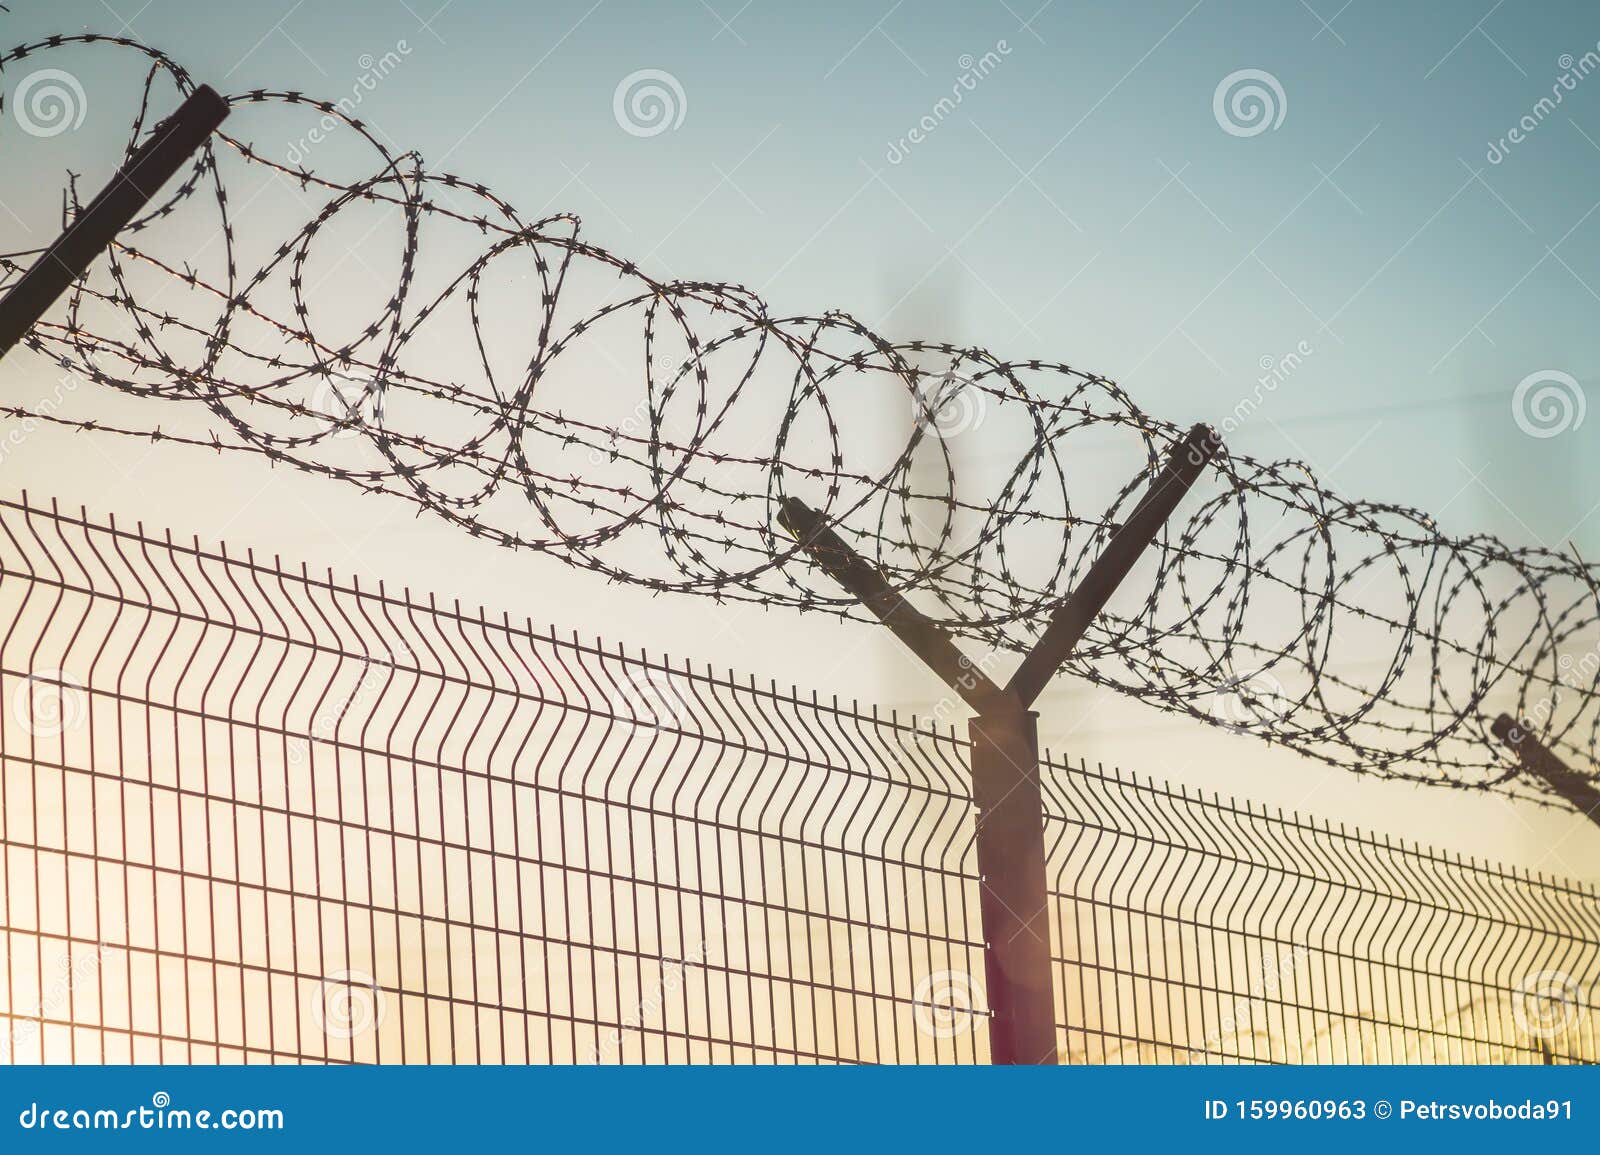 barbed wire steel fence against the immigration in europe. restricted area.